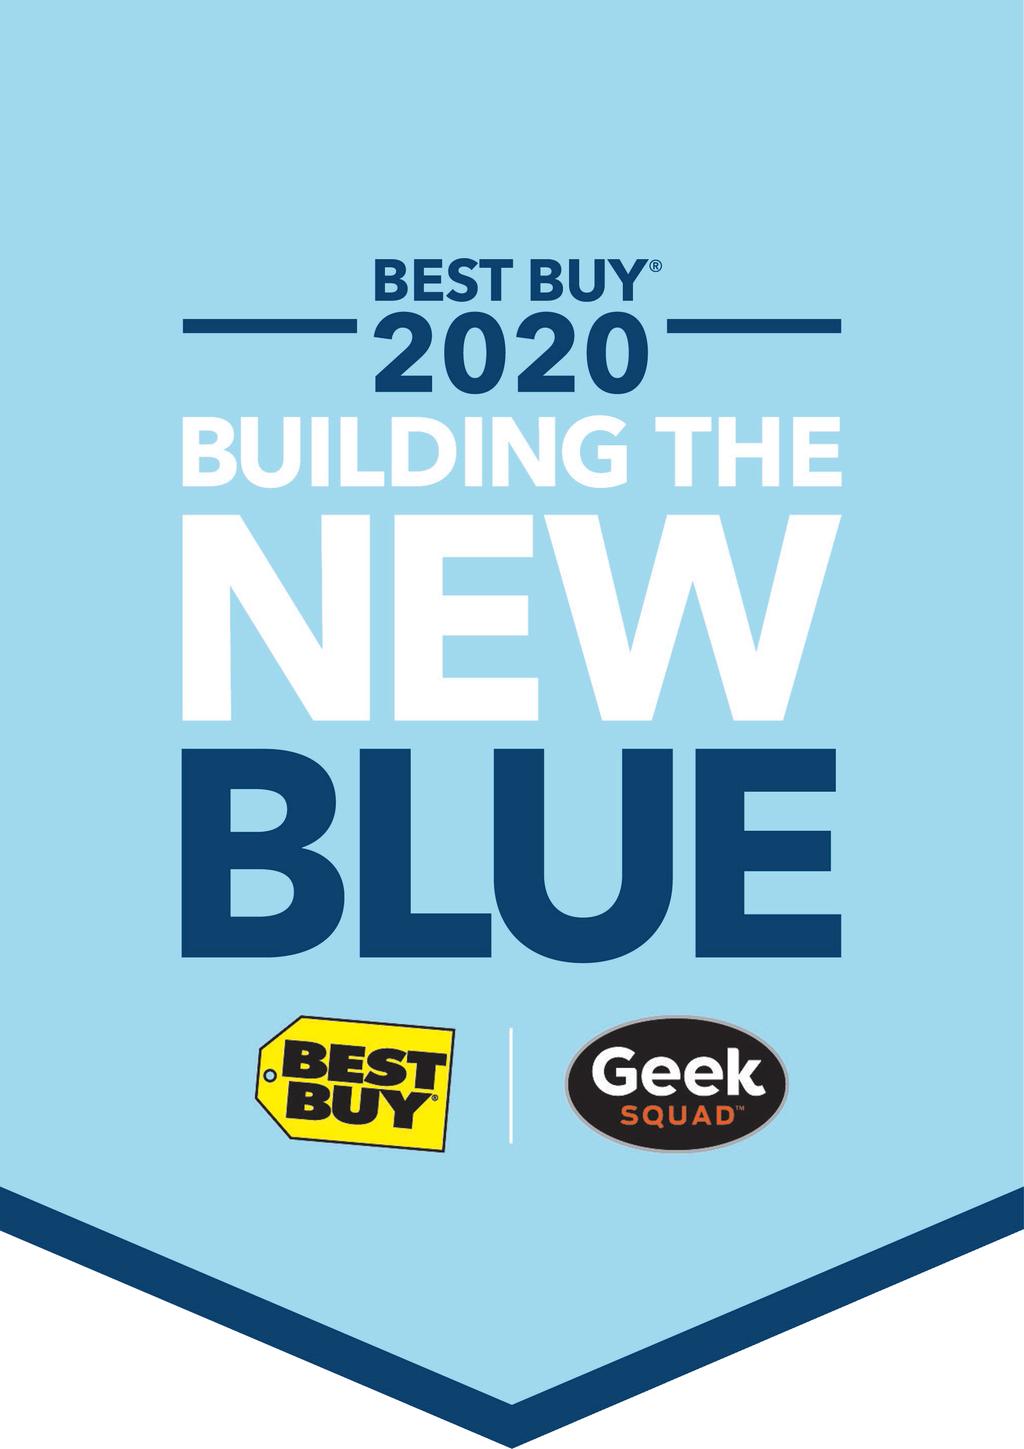 4. We launched the next phase of our journey, Best Buy 2020: Building the New Blue. On March 1 this year, we unveiled the strategy for this next phase, Best Buy 2020: Building the New Blue.